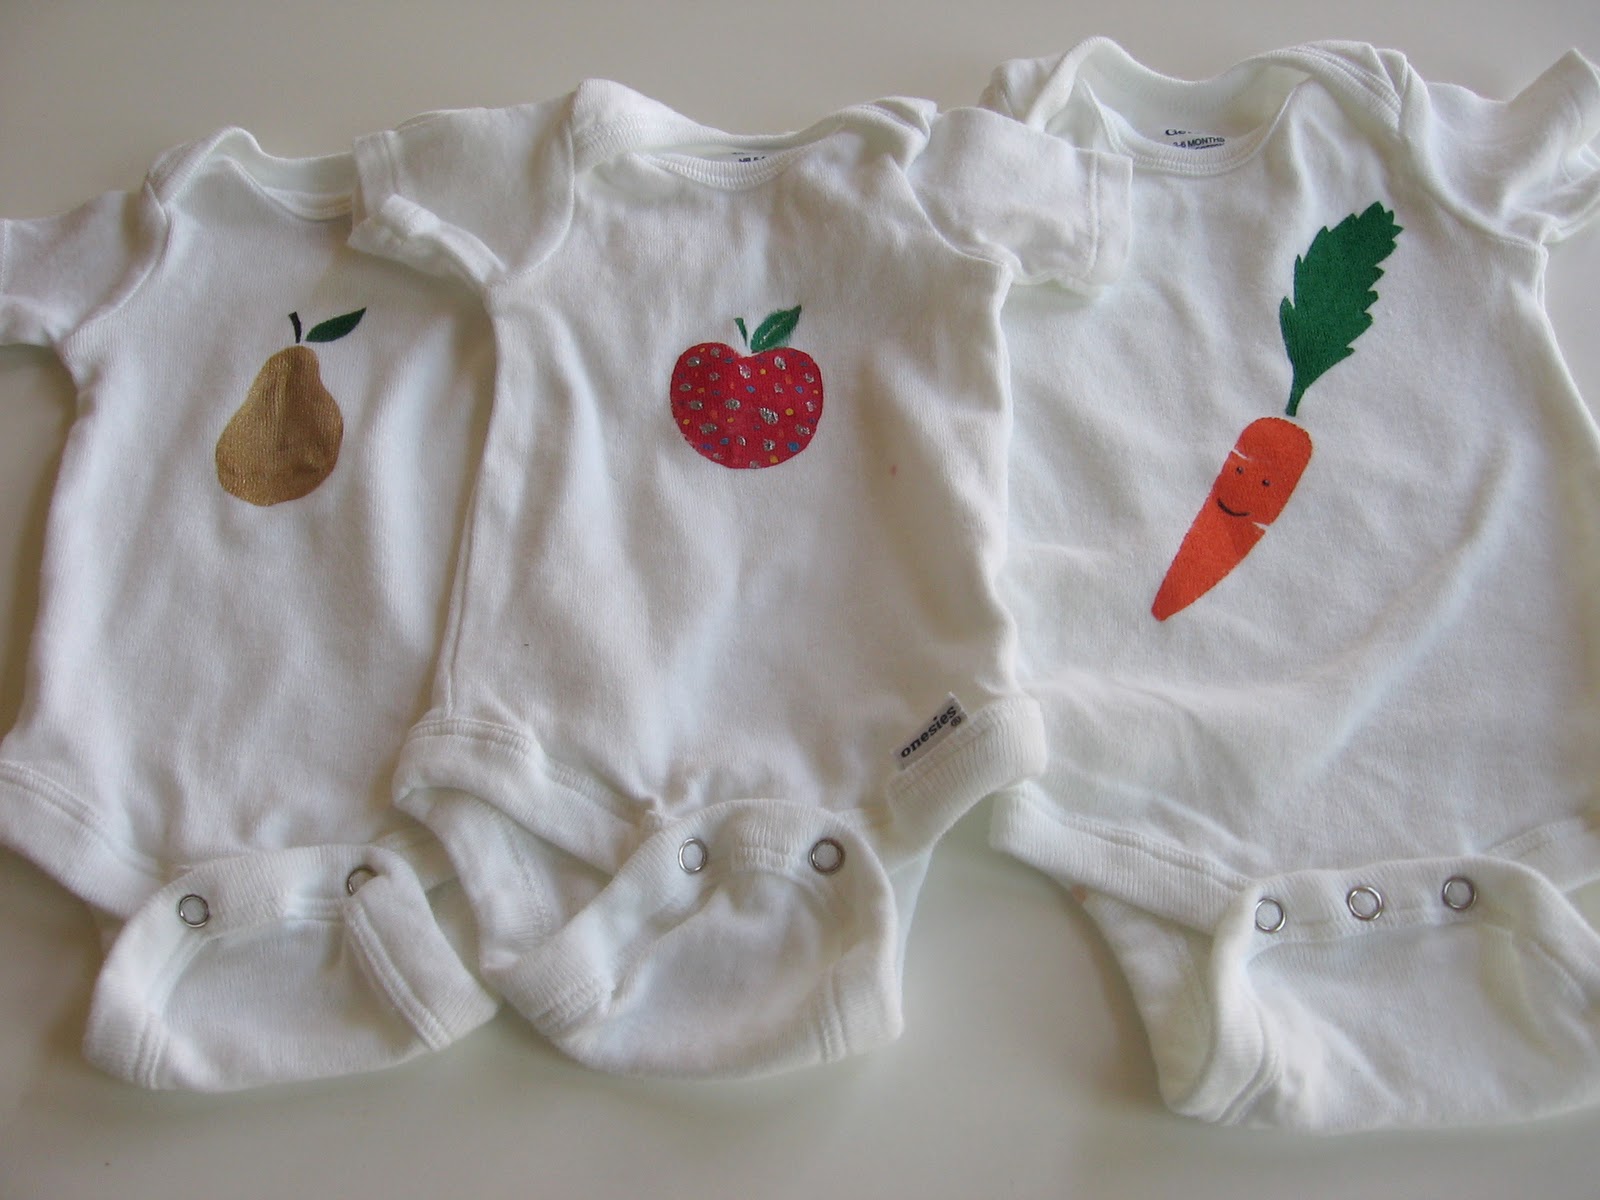 Needle and Spatula: Baby Shower Activity - Decorating Onesies with